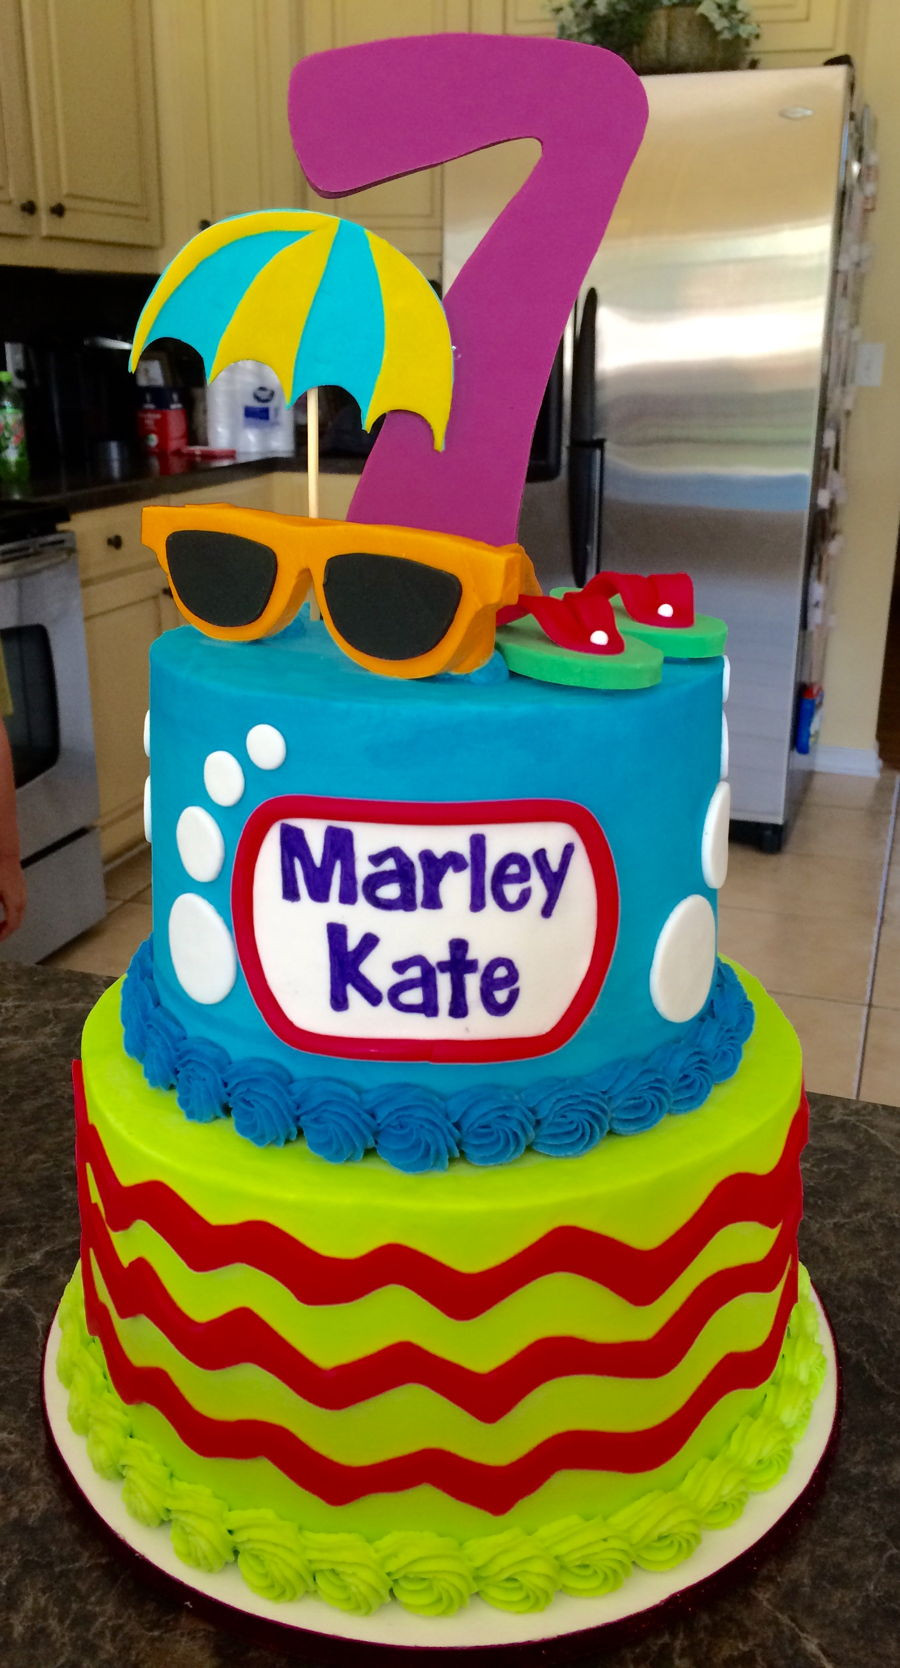 Pool Party Cake Ideas For Birthdays
 Pool Party Cake CakeCentral